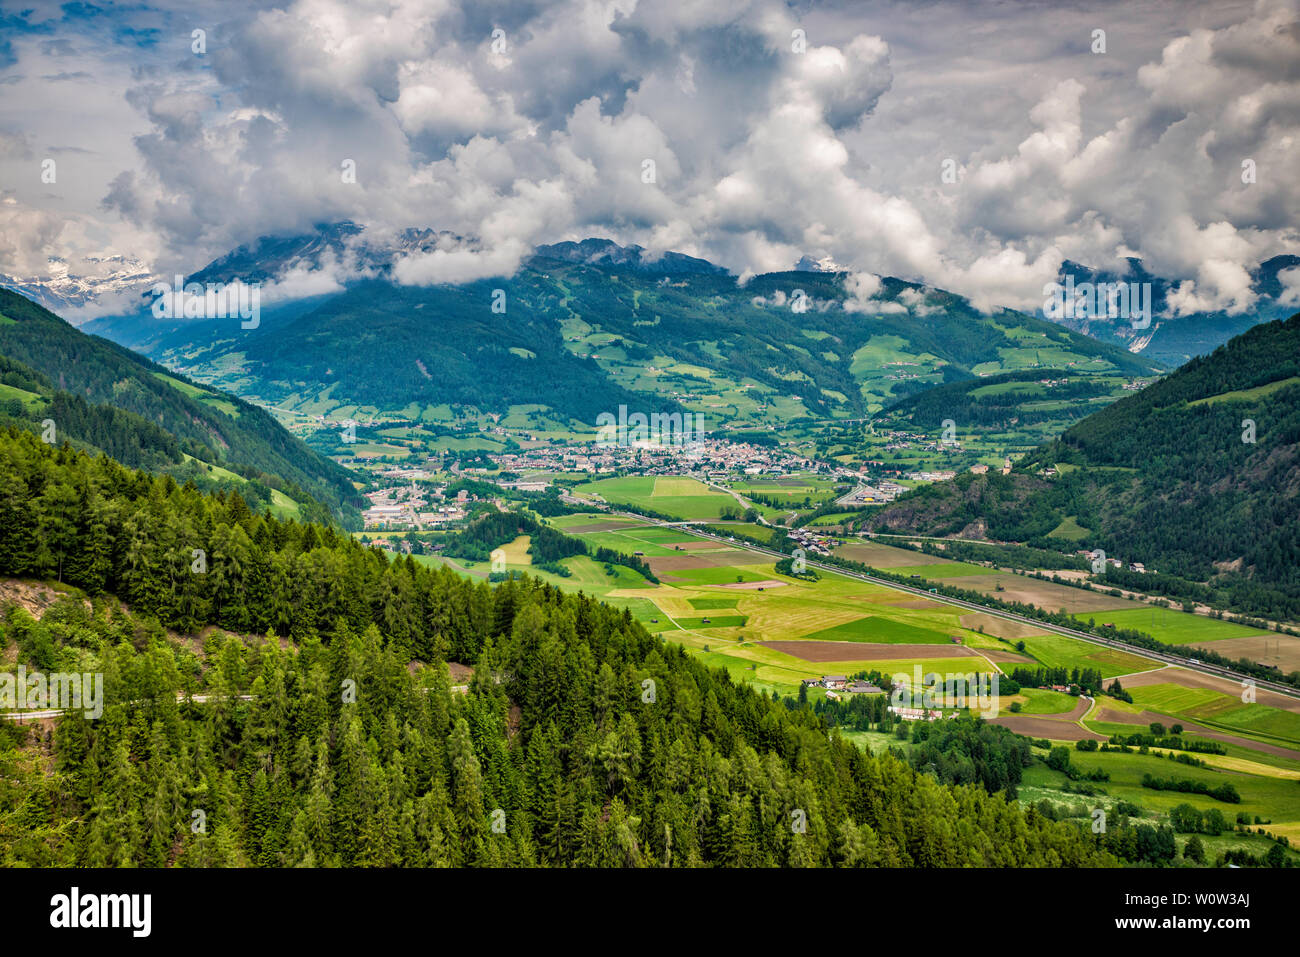 Distant view of town of Sterzing (Vipiteno) in Eisack Valley, from road SS508 near Penserjoch (Passo Pennes), Sarntal Alps, Trentino-Alto Adige, Italy Stock Photo